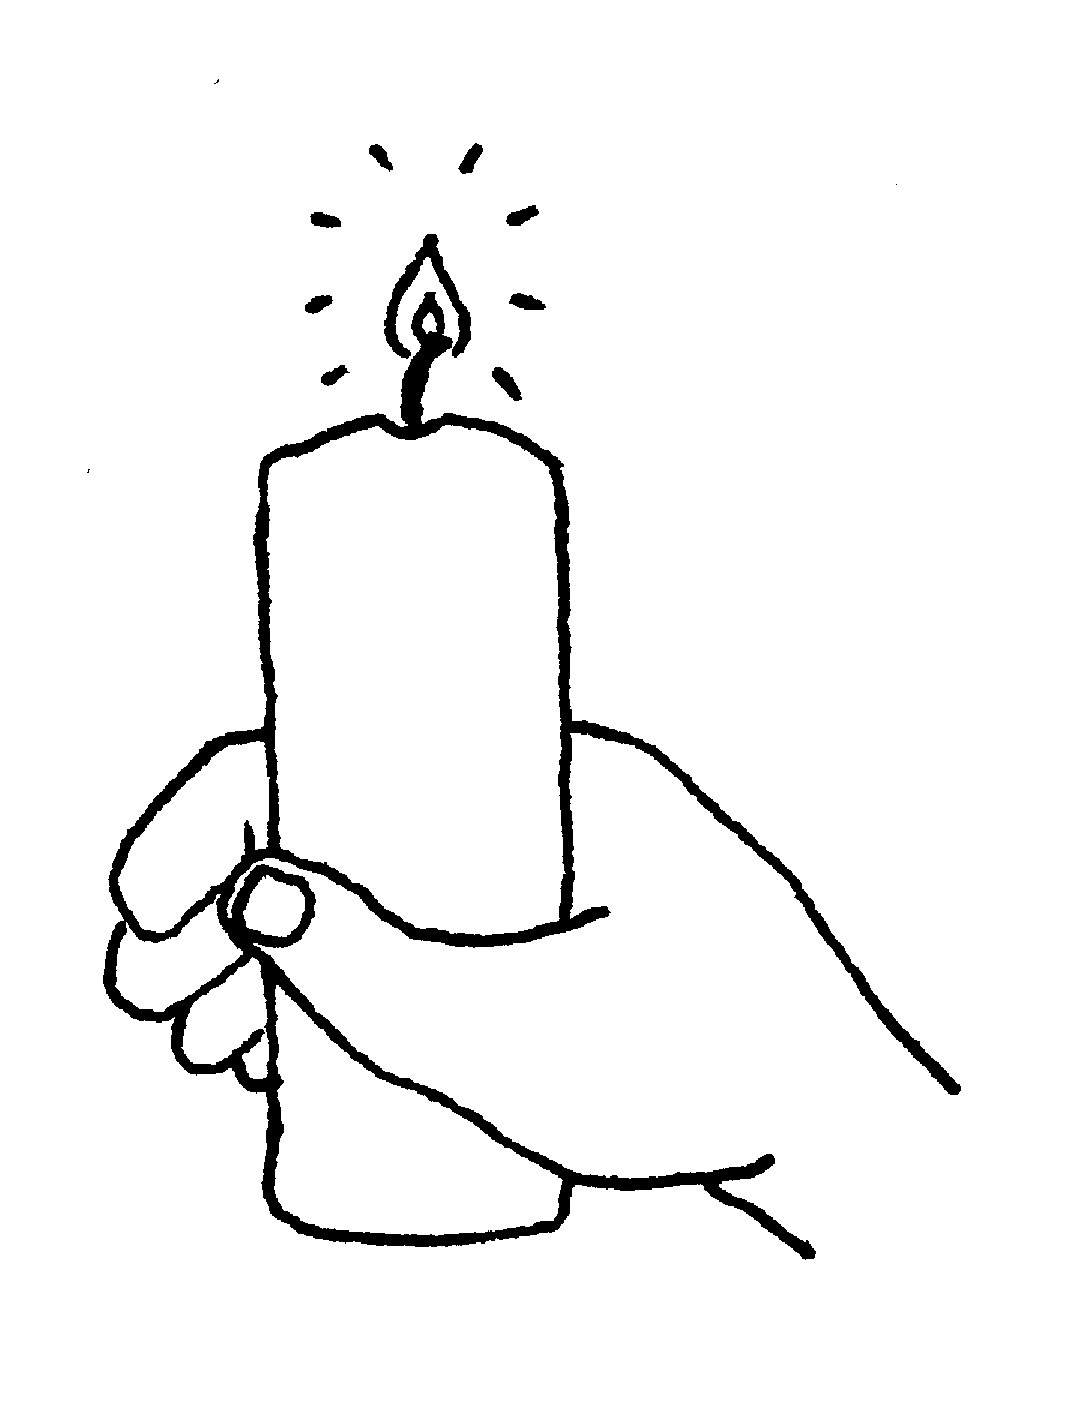 Free candles clip art free clipart images image